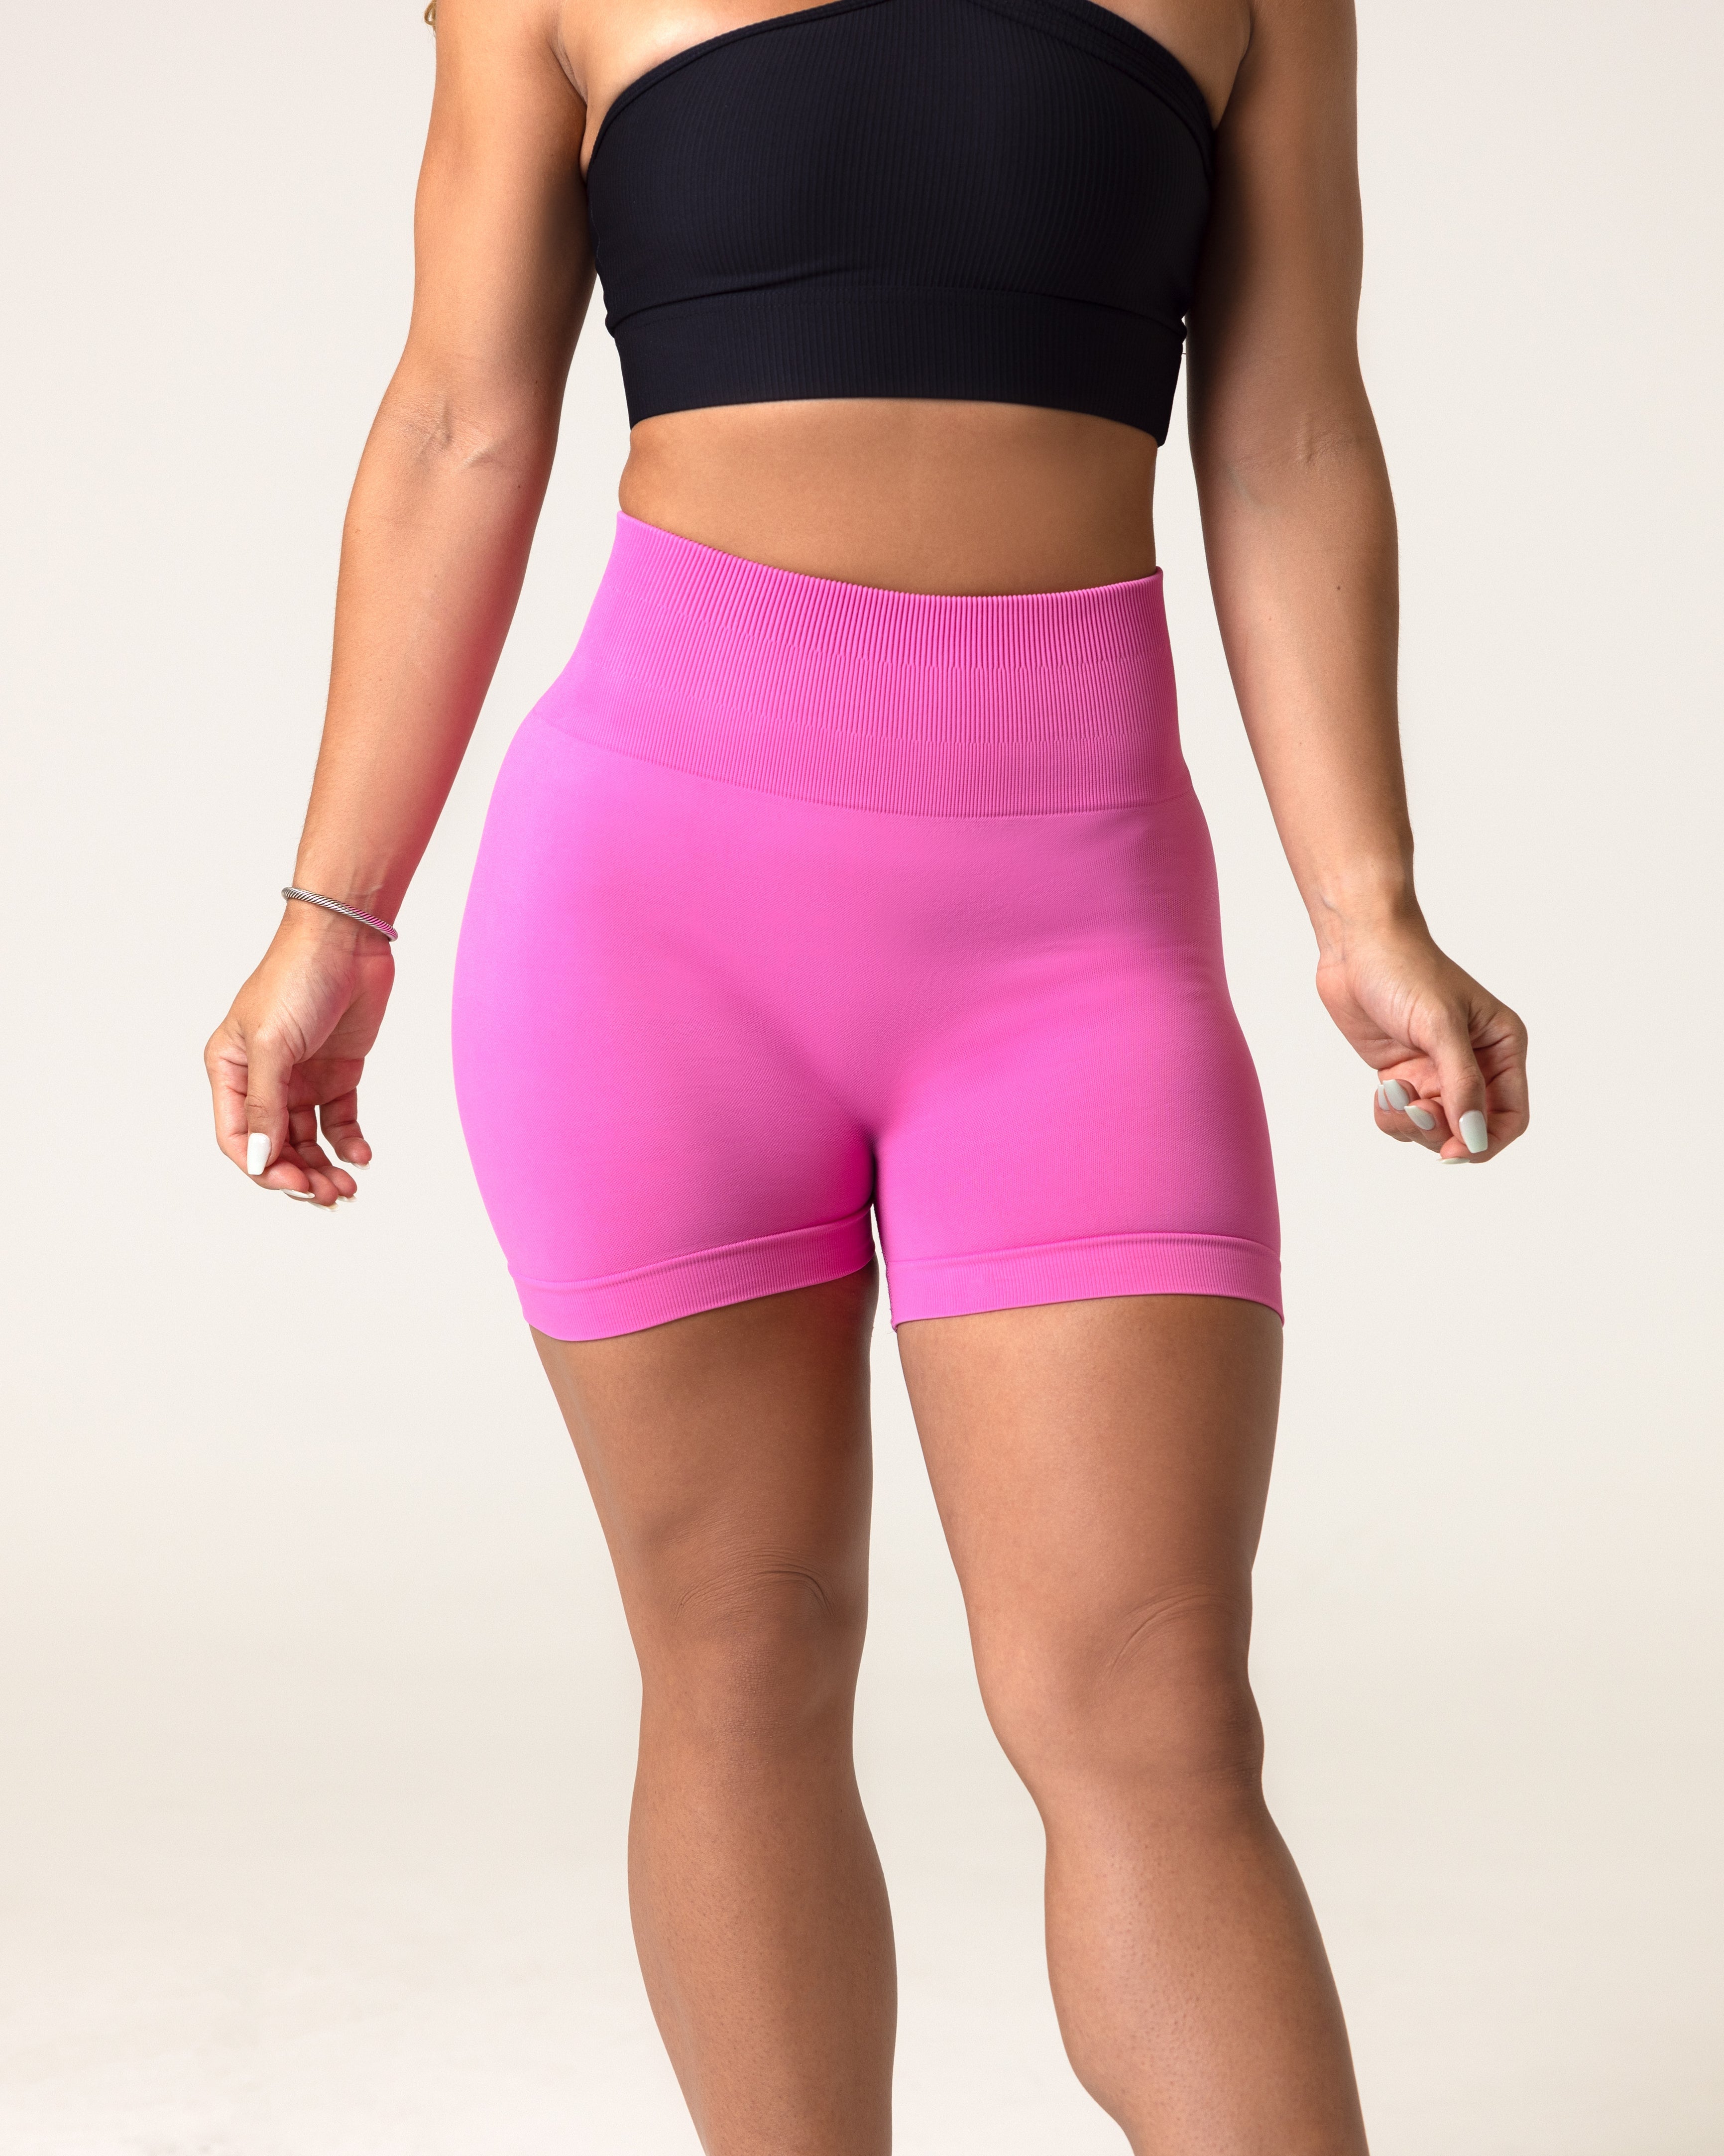 A woman wearing gym workout pink clothes